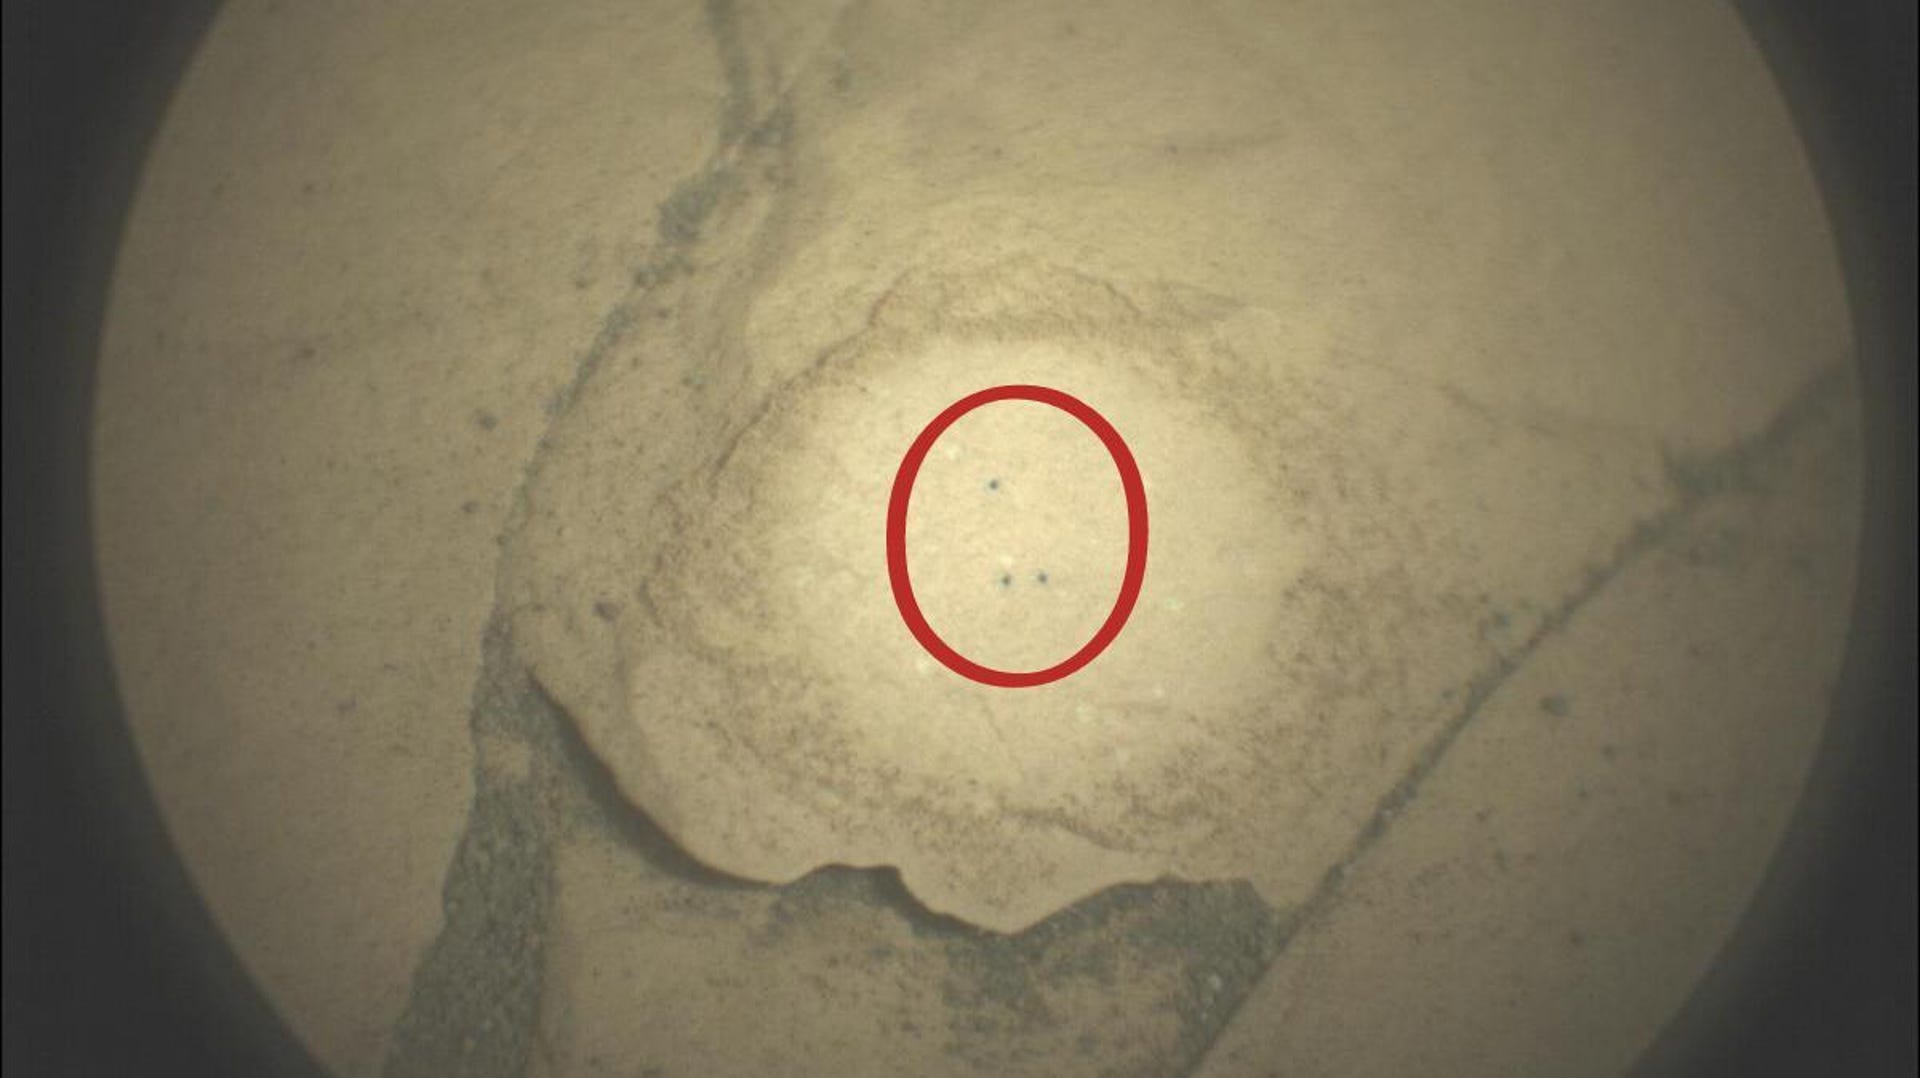 A close-up look at three tiny L-shaped dots on a beige Martian rock surrounded by a red circle.